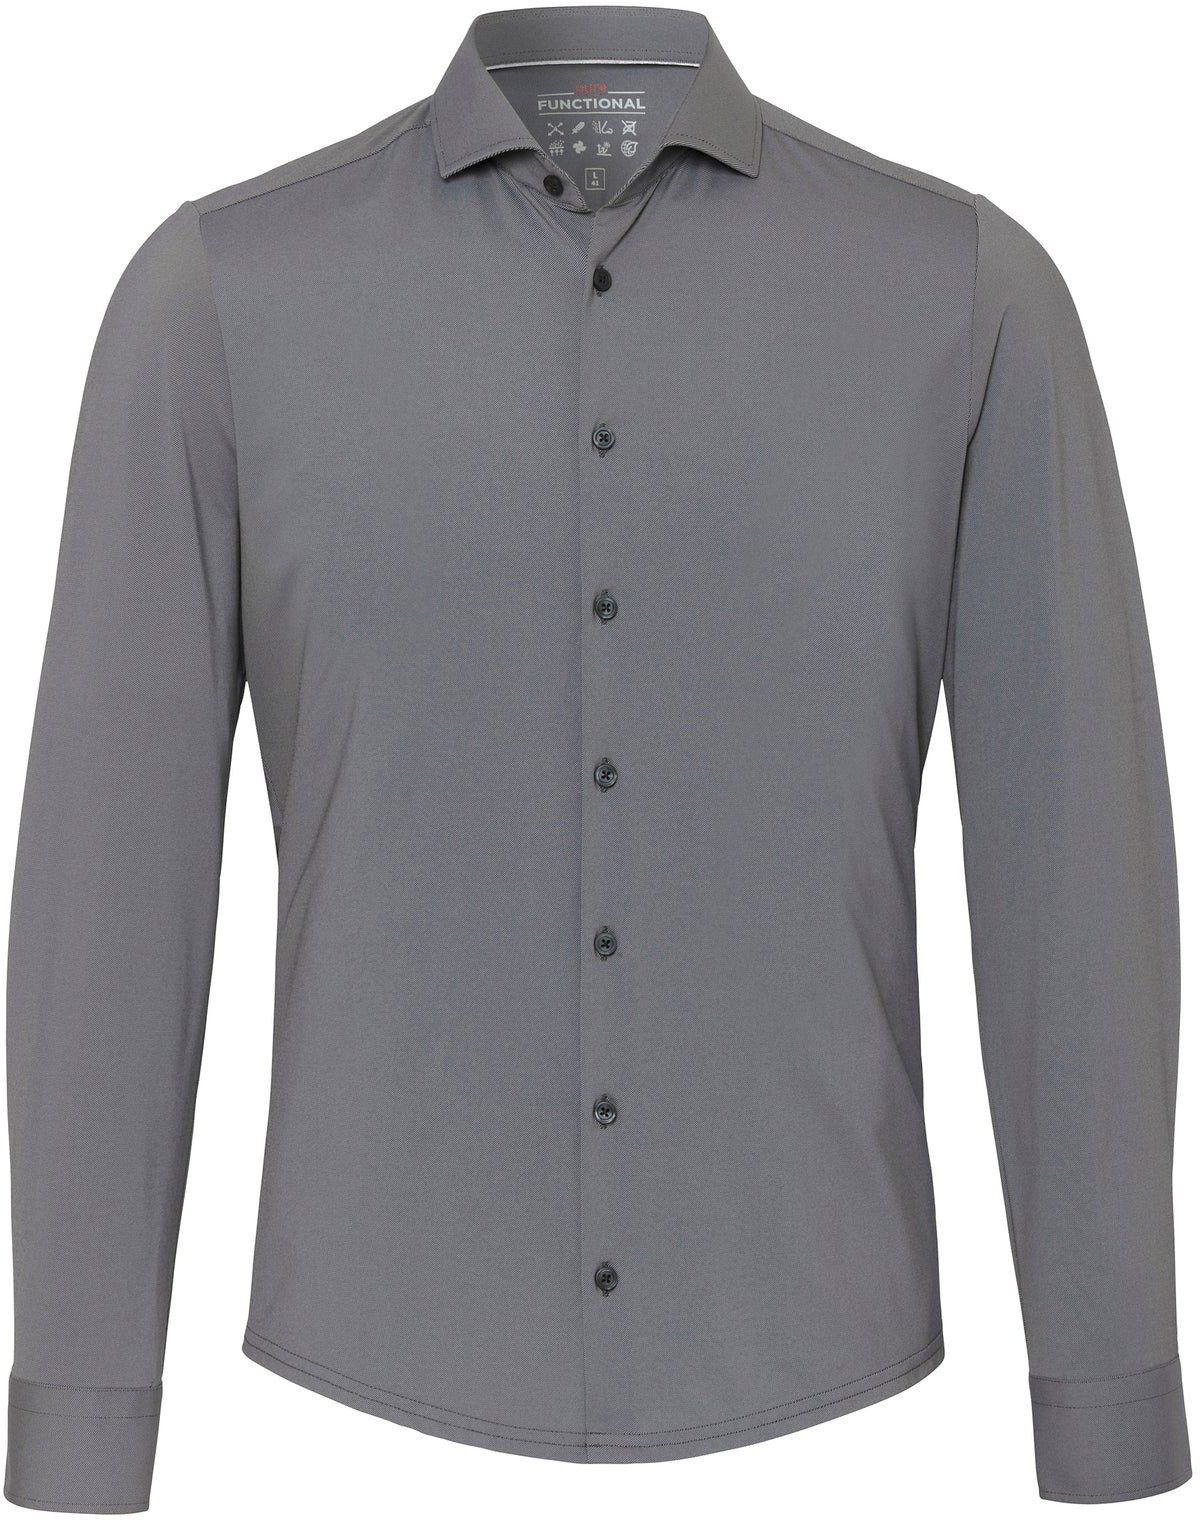 Pure The Functional Shirt Grey size 15